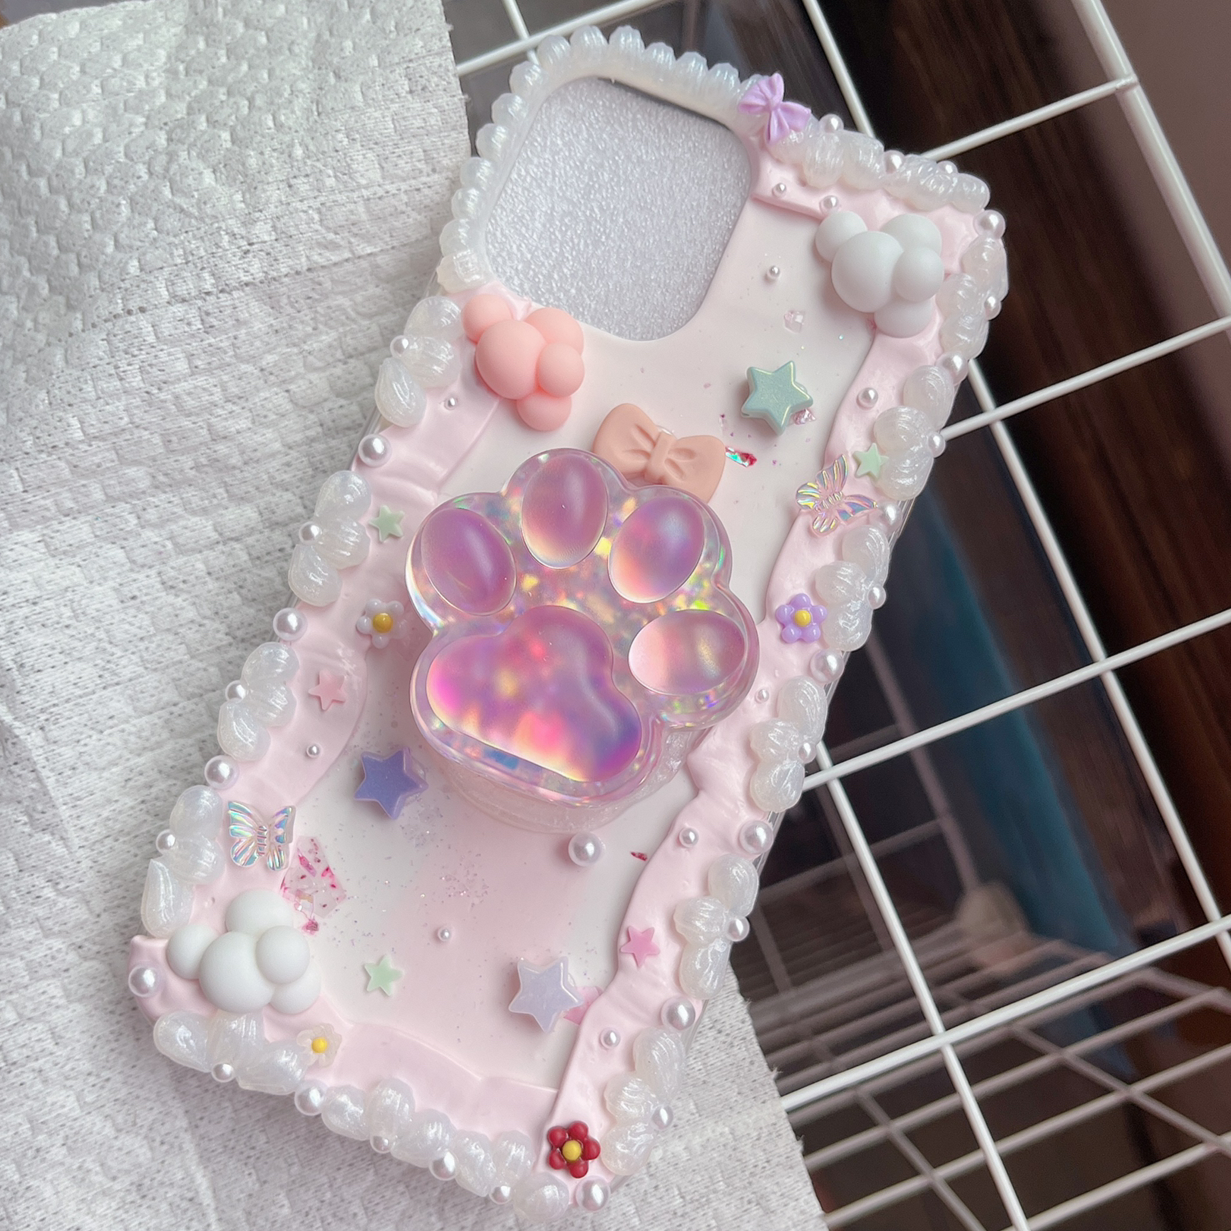 Limited Edition | Exclusive Handmade Decoden Phone Case